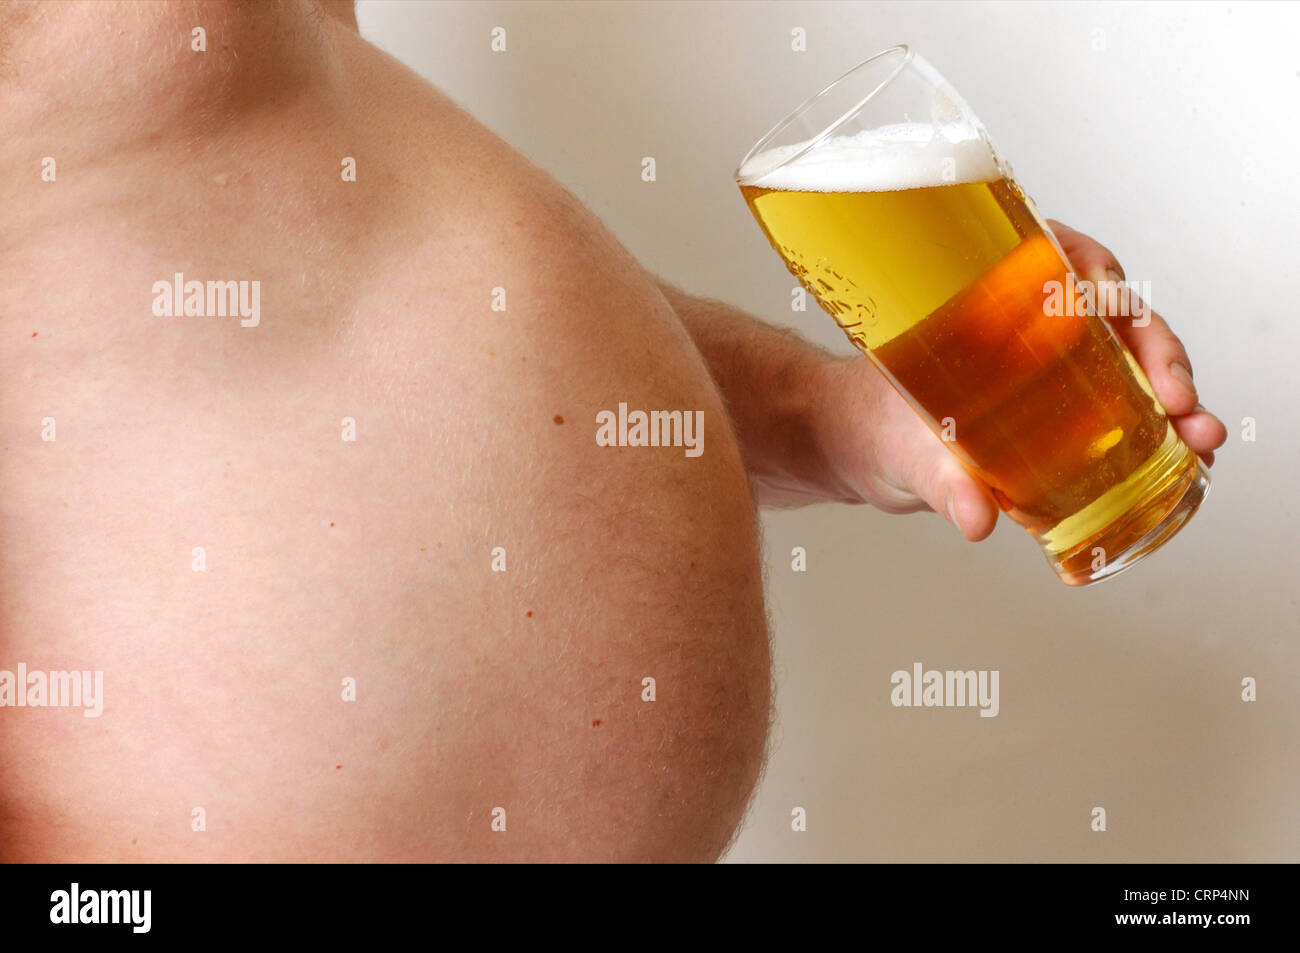 Man with a large beer gut holding a pint glass full of beer. Stock Photo